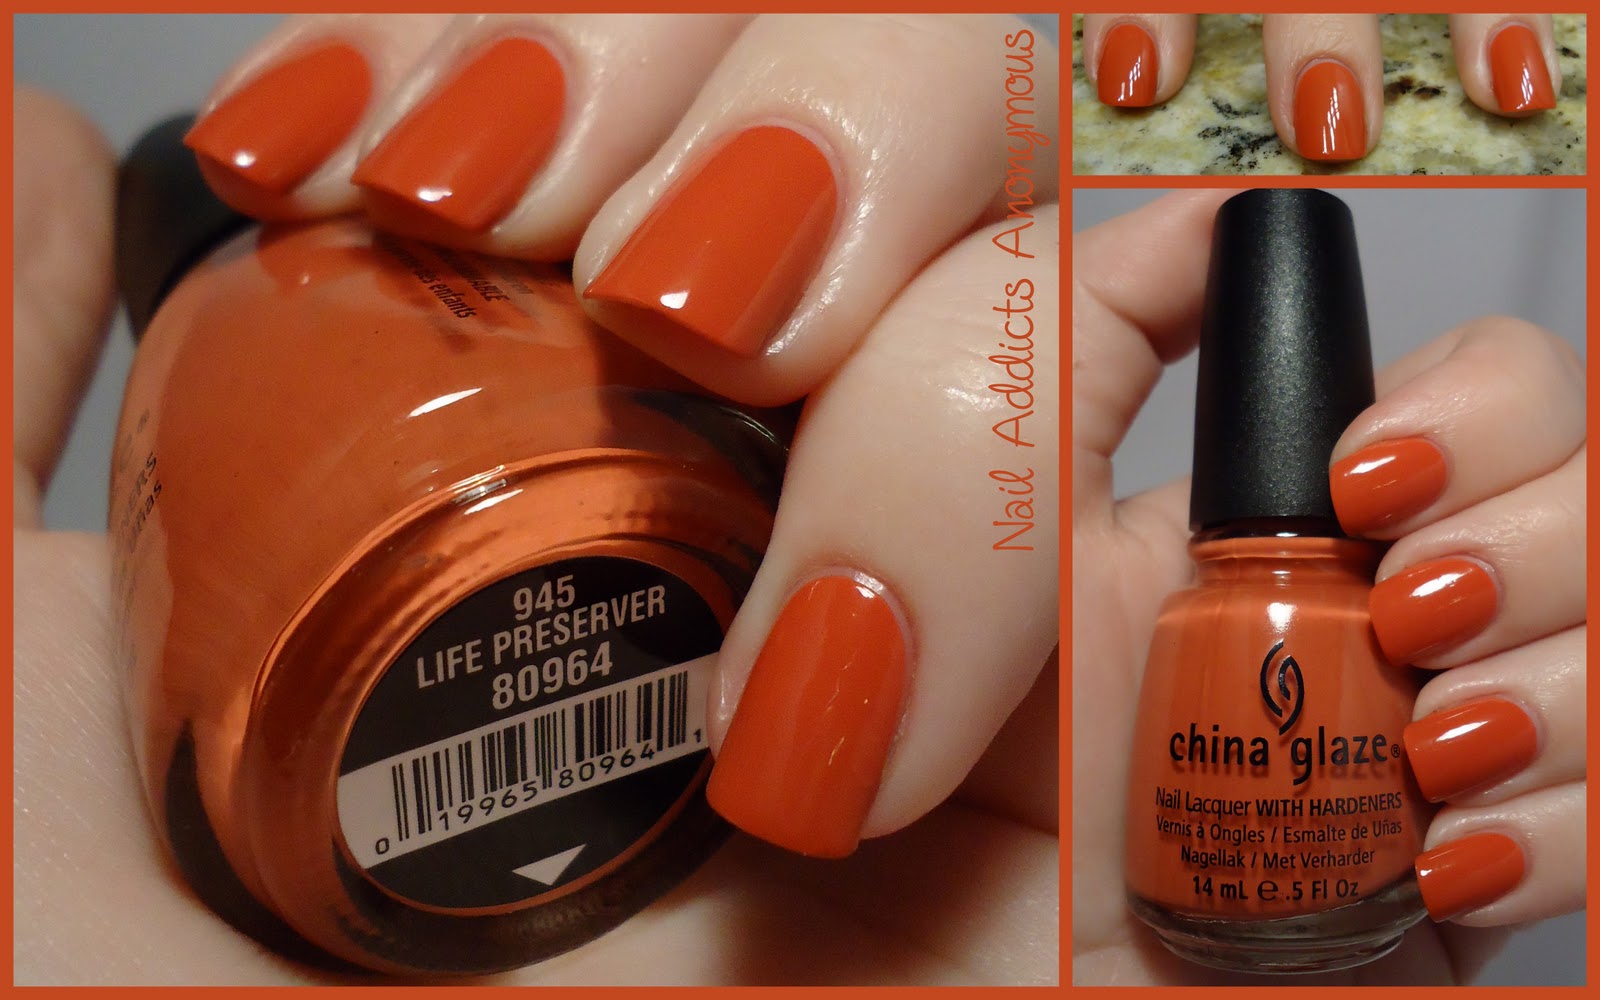 4. China Glaze Nail Lacquer in "Life Preserver" - wide 8